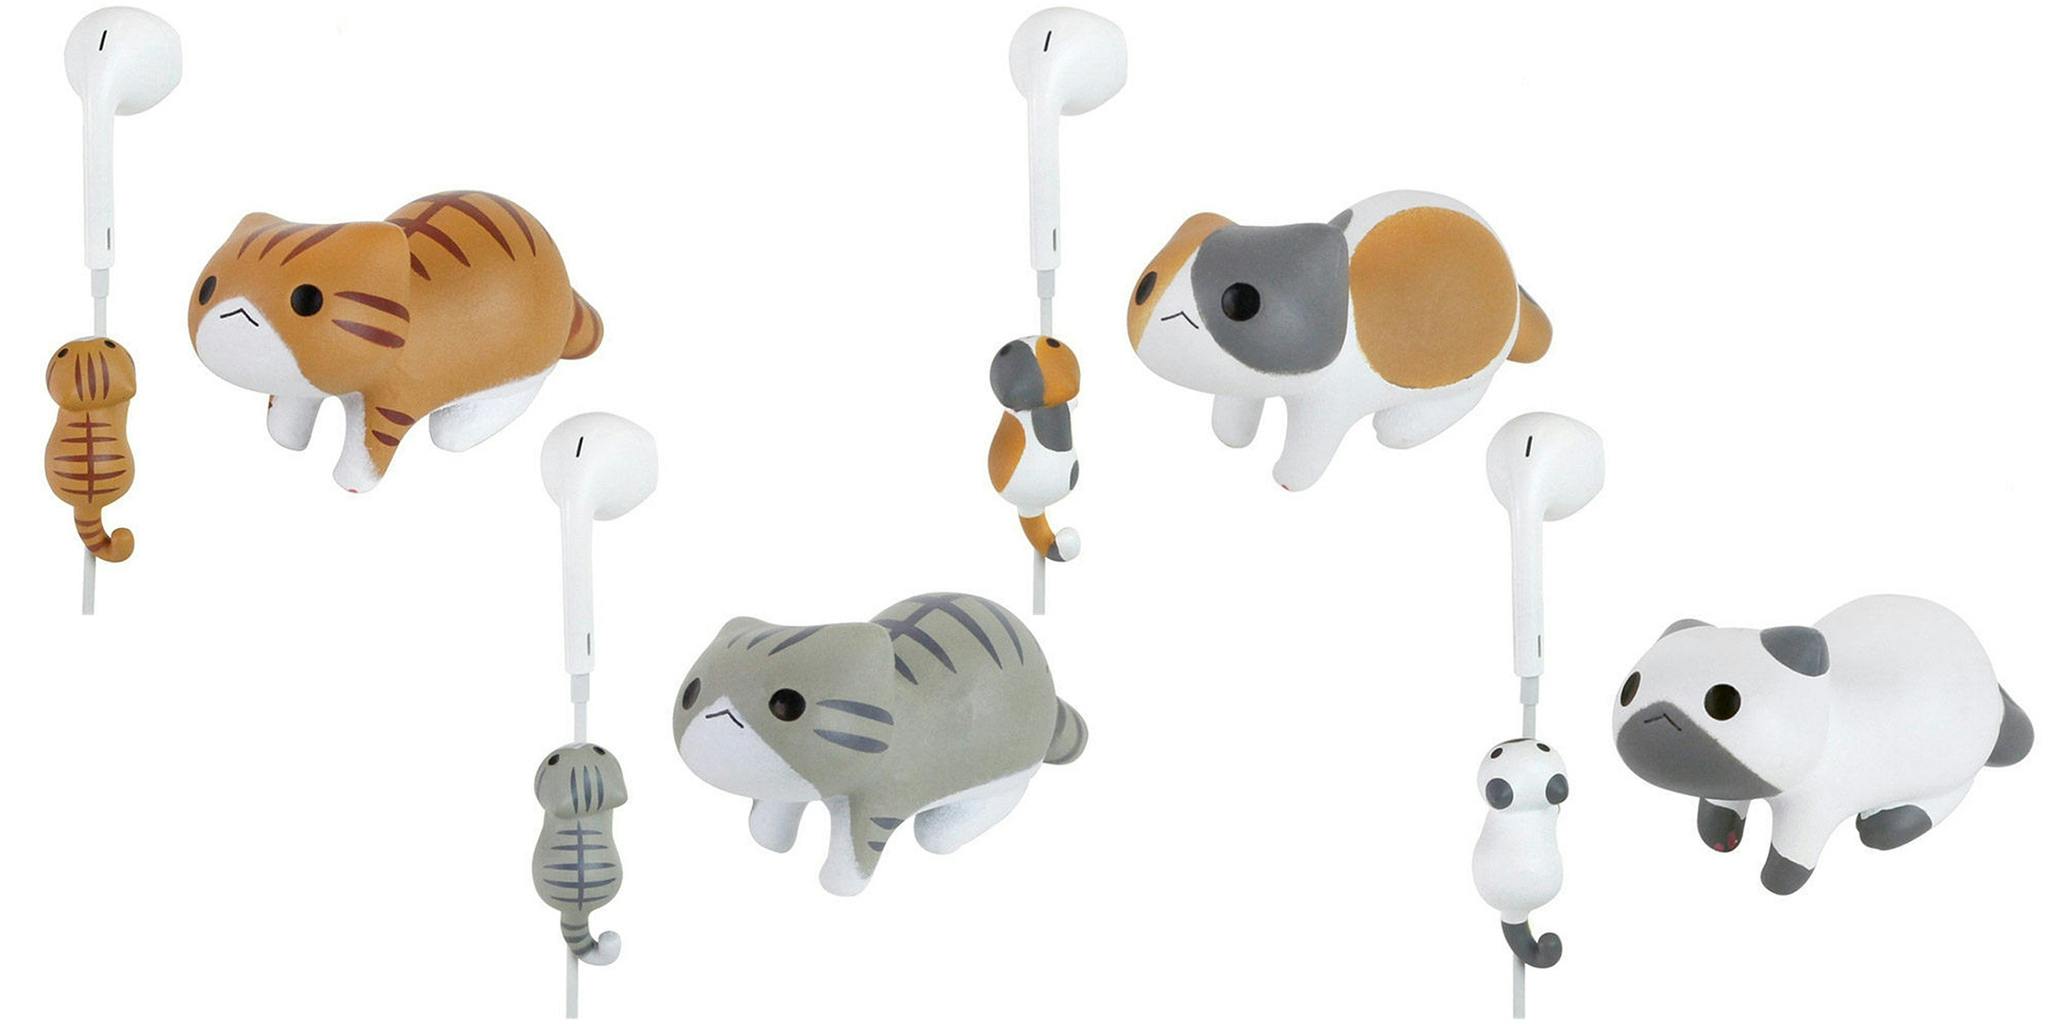 These adorable cats dangle from your headphones - The Daily Dot